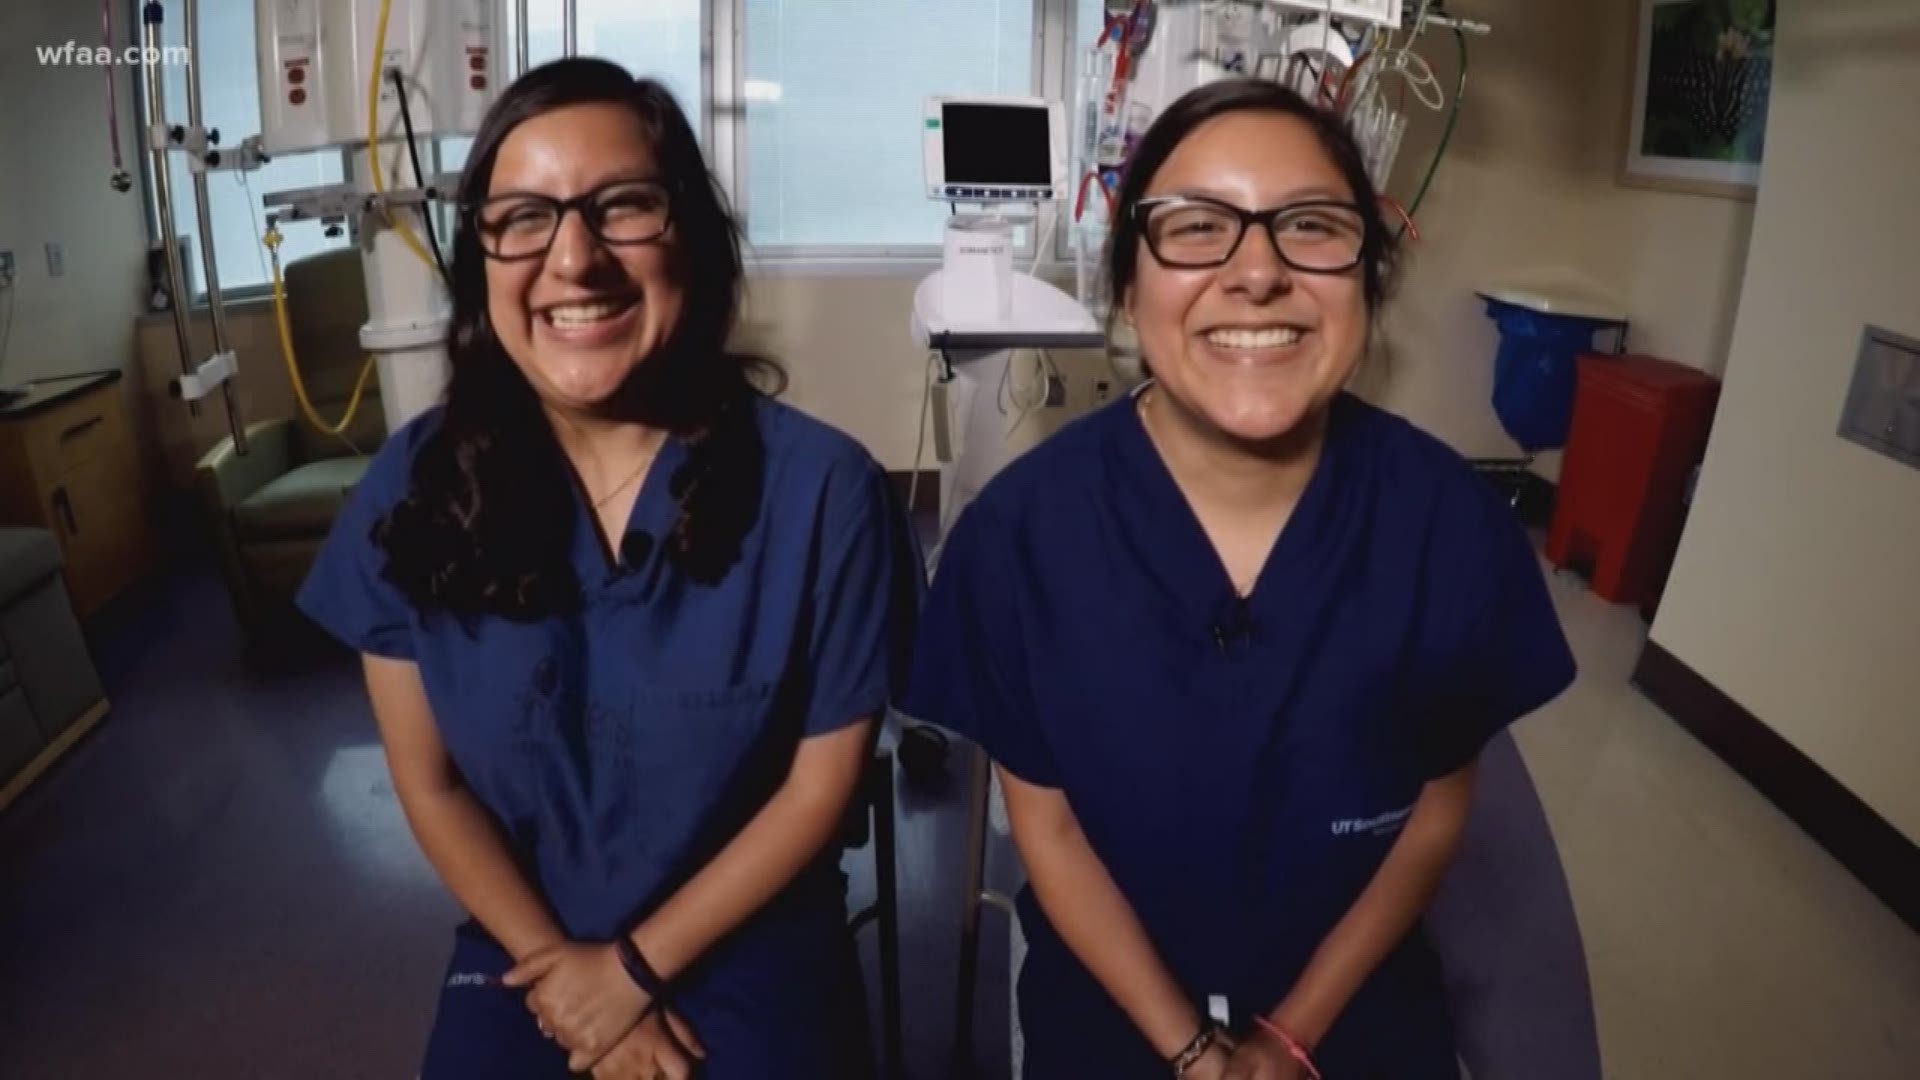 The two sisters are working a local hospitals and getting a jump on their future. "There's no internship where you're going to say you didn't learn anything," one of the girls said.